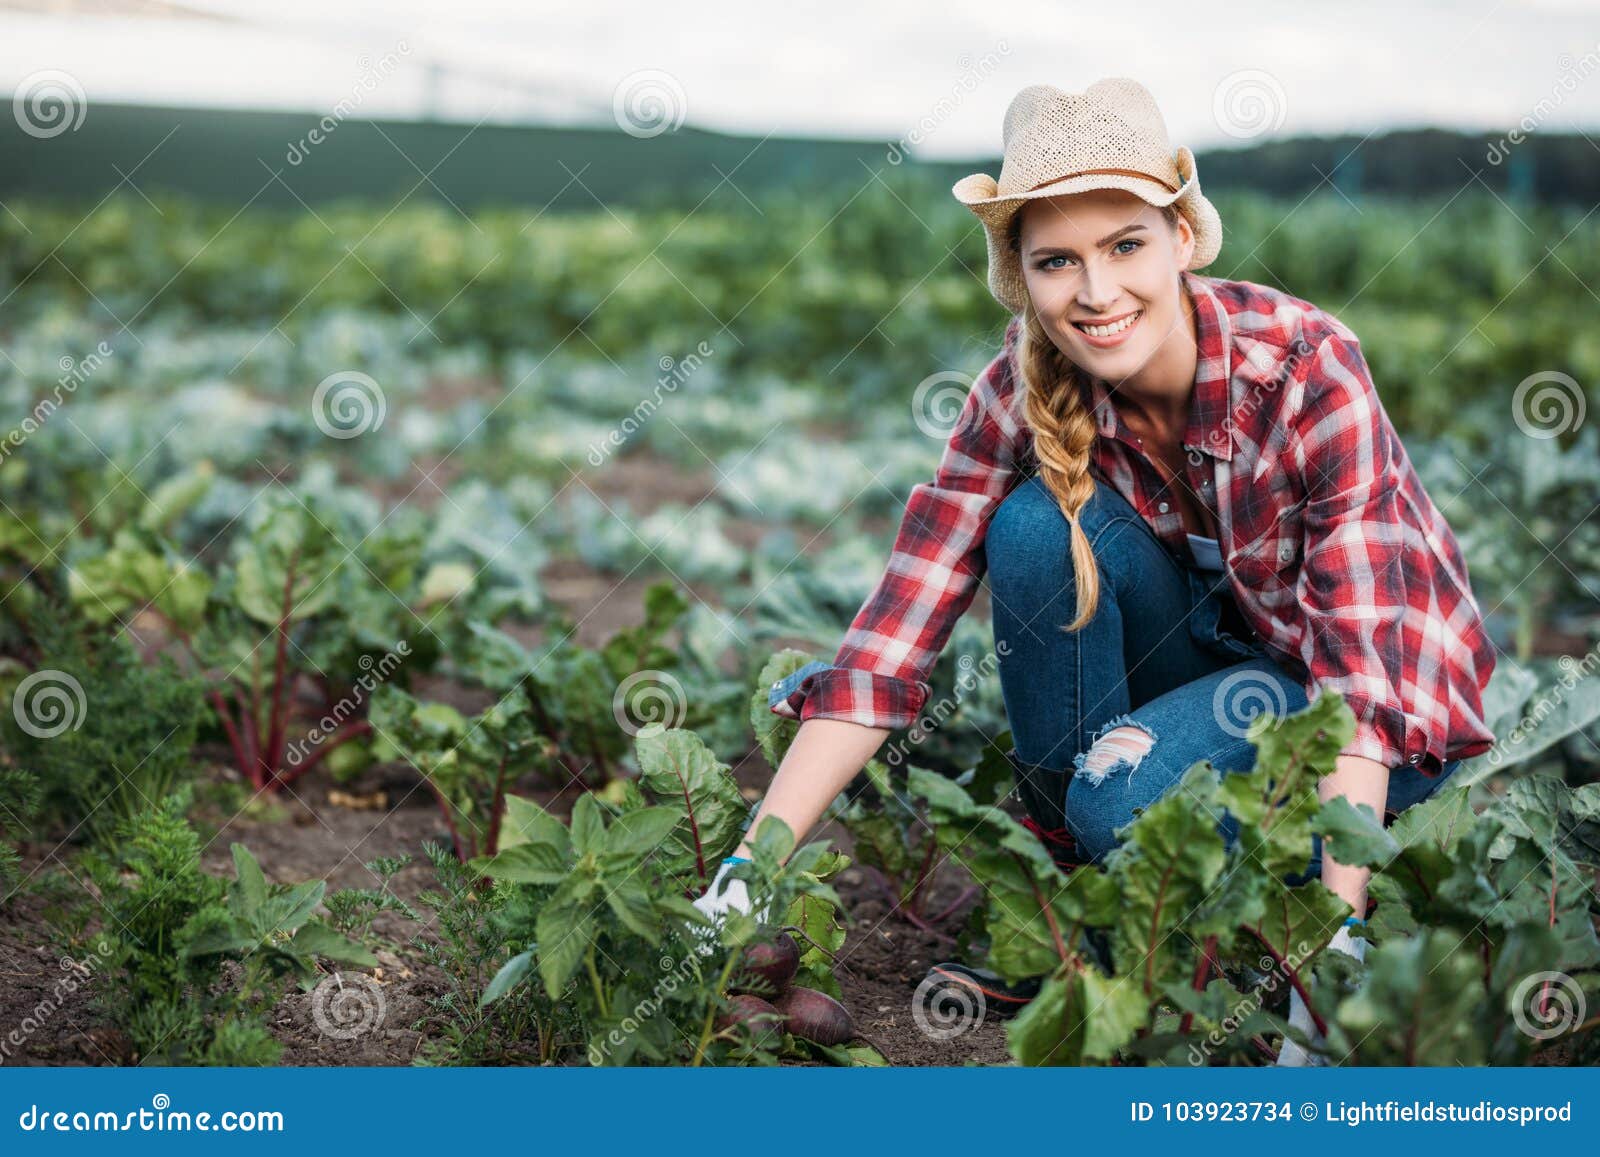 Farmer harvesting beets. Young female farmer in hat harvesting beetroots and smiling at camera in field